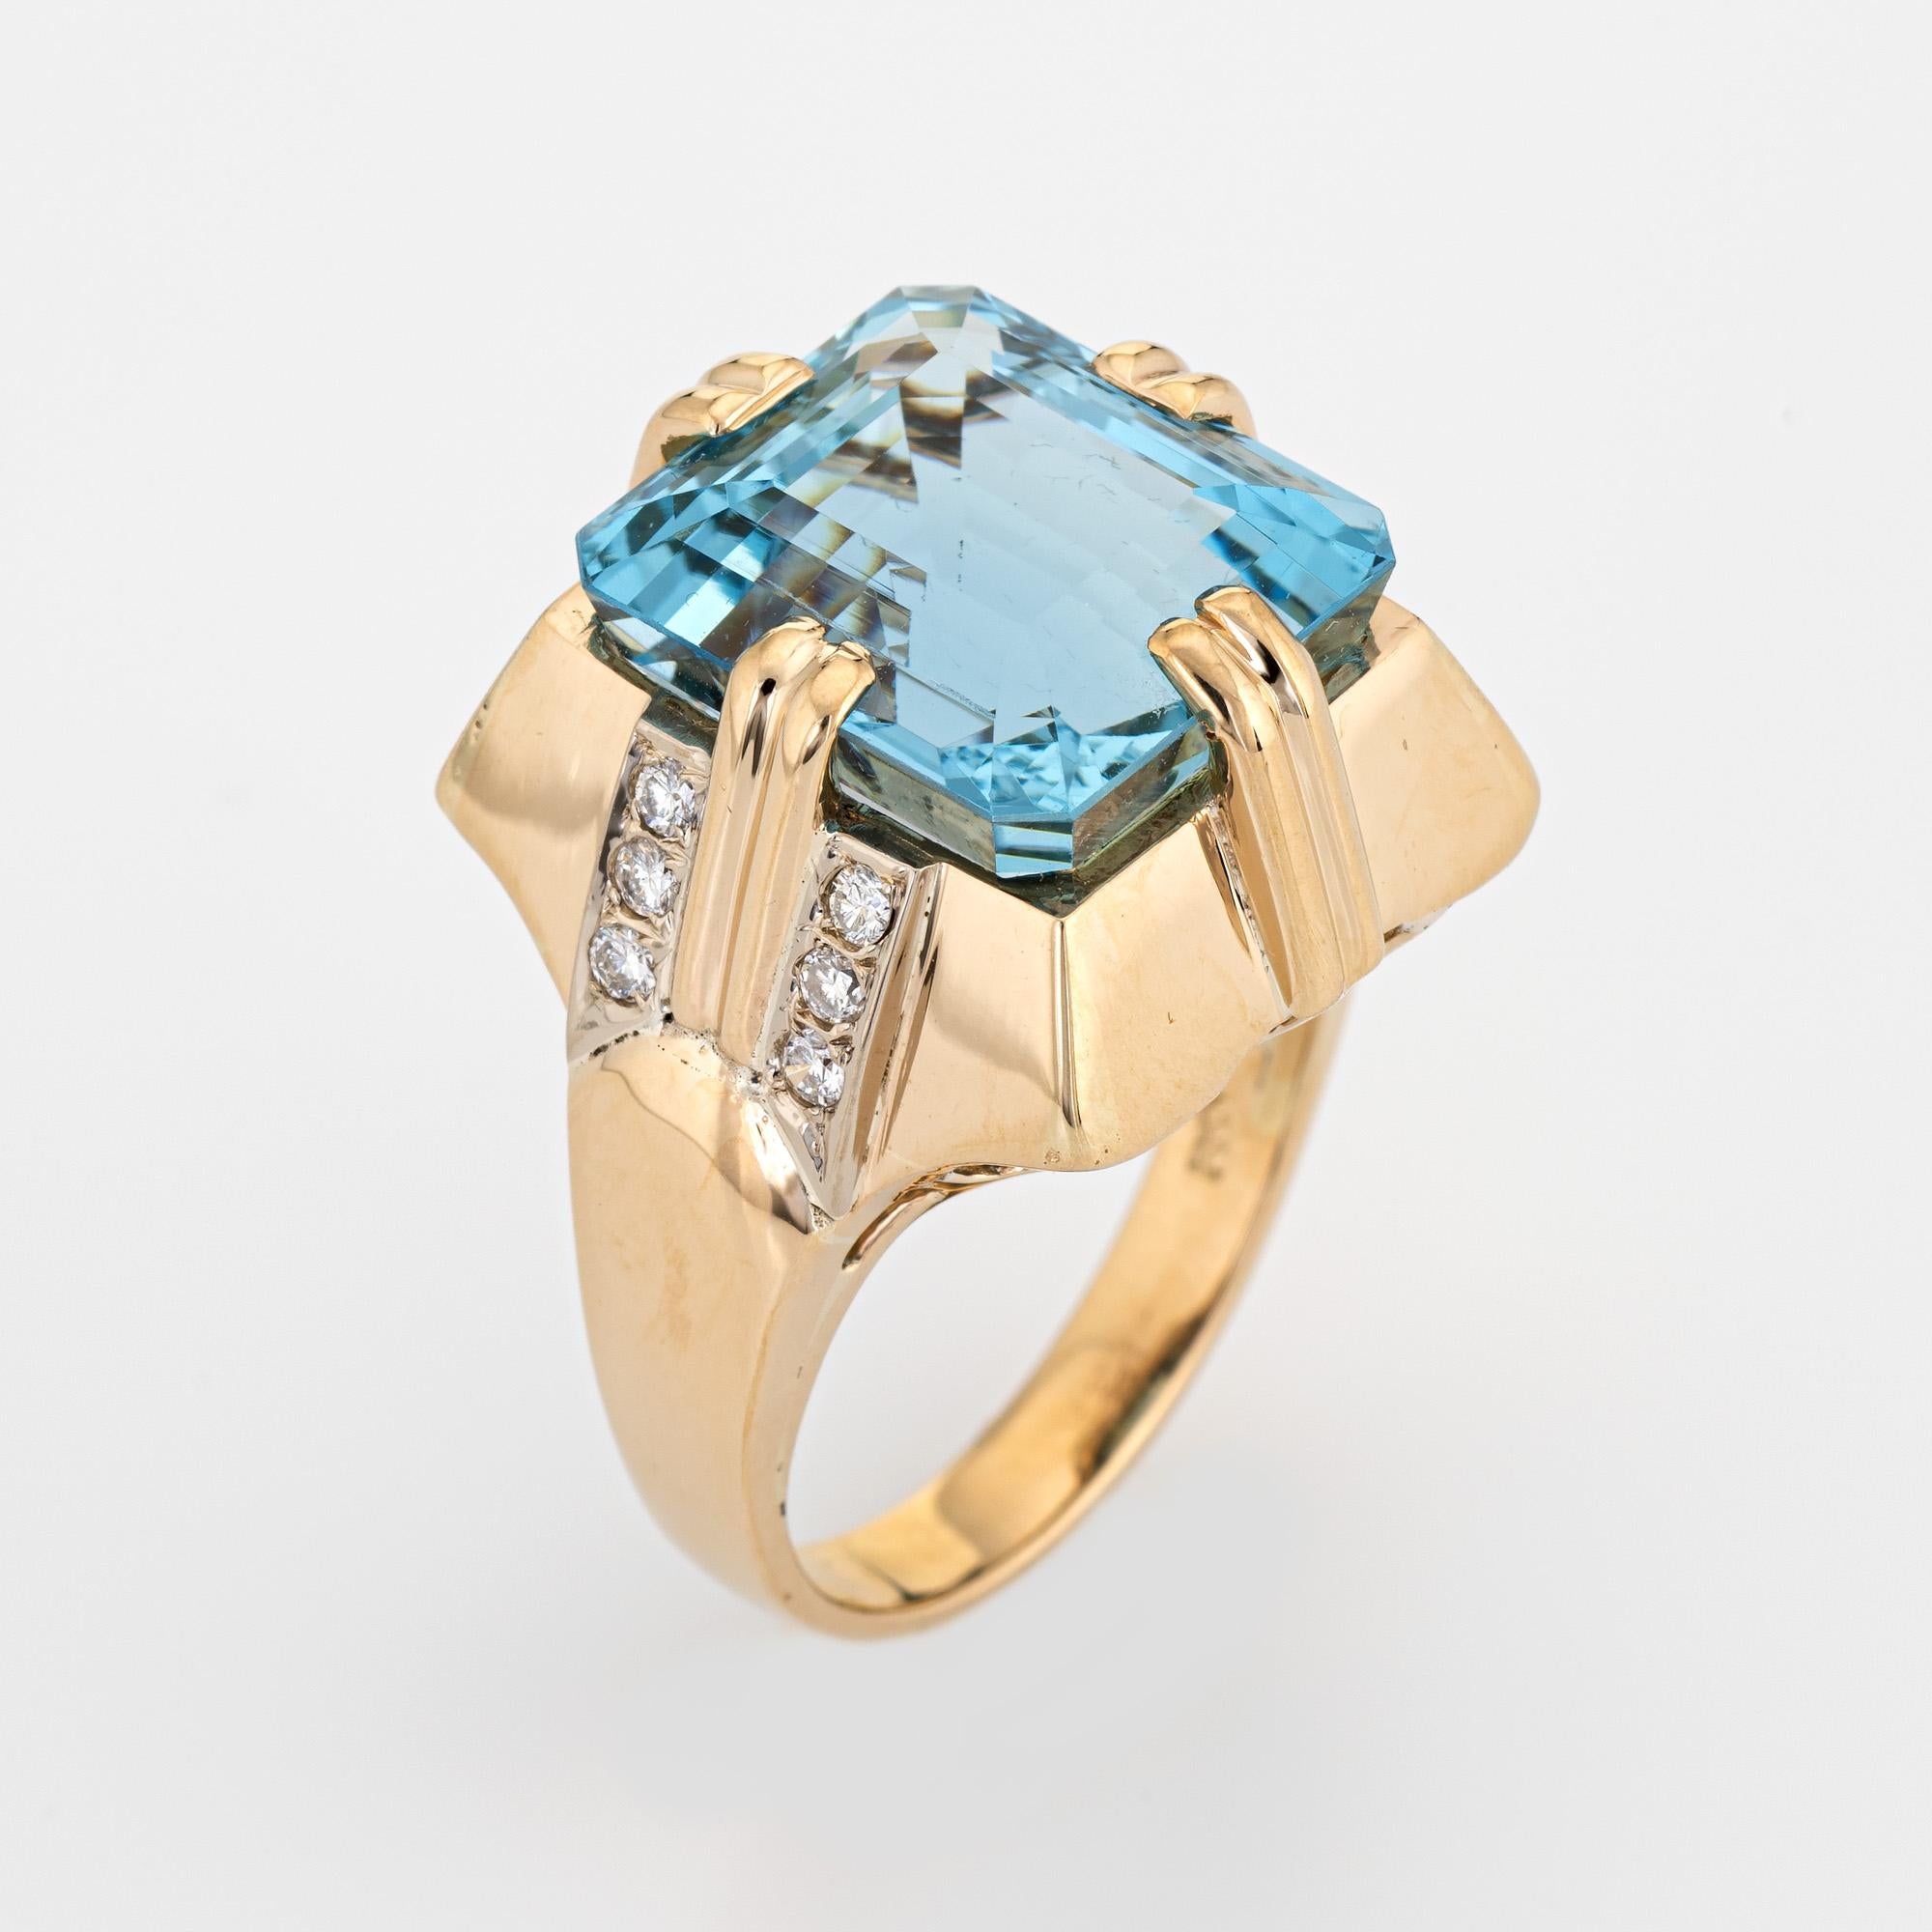 Stylish vintage estimated 11 carat aquamarine & diamond cocktail ring (circa 1960s) crafted in 14 karat yellow gold. 

Emerald cut aquamarine measures 13.5mm x 12mm (estimated at 11 carats). The aquamarine is in very good condition and free of